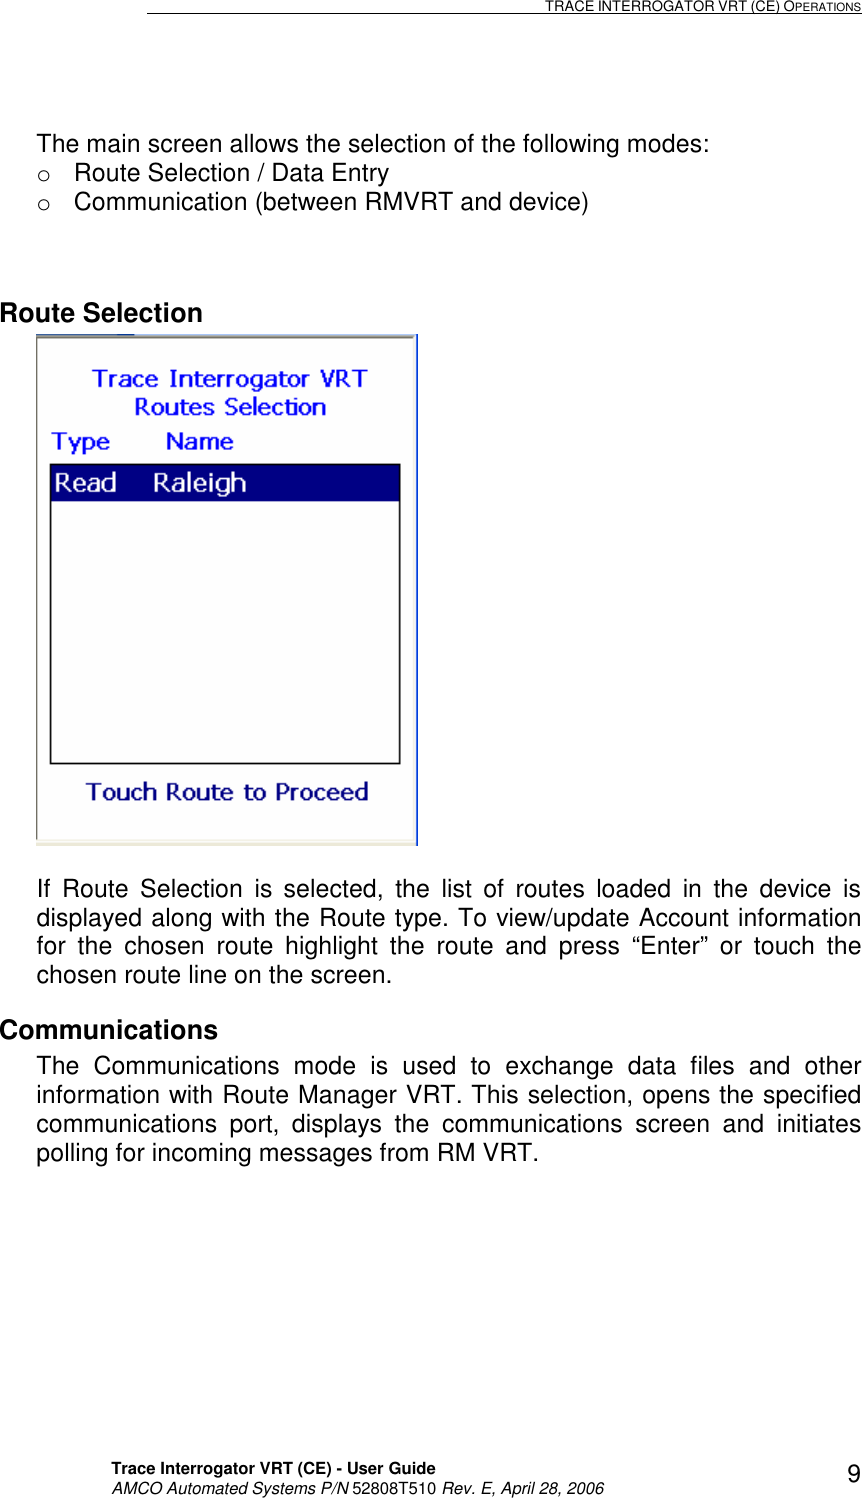                                                                                                                              TRACE INTERROGATOR VRT (CE) OPERATIONS    Trace Interrogator VRT (CE) - User Guide   AMCO Automated Systems P/N 52808T510 Rev. E, April 28, 2006 9  The main screen allows the selection of the following modes: o  Route Selection / Data Entry o  Communication (between RMVRT and device)  Route Selection   If  Route  Selection  is  selected,  the  list  of  routes  loaded  in  the  device  is displayed along with the Route type. To view/update Account information for  the  chosen  route  highlight  the  route  and  press  “Enter”  or  touch  the chosen route line on the screen. Communications The  Communications  mode  is  used  to  exchange  data  files  and  other information with Route Manager VRT. This selection, opens the specified communications  port,  displays  the  communications  screen  and  initiates polling for incoming messages from RM VRT.  